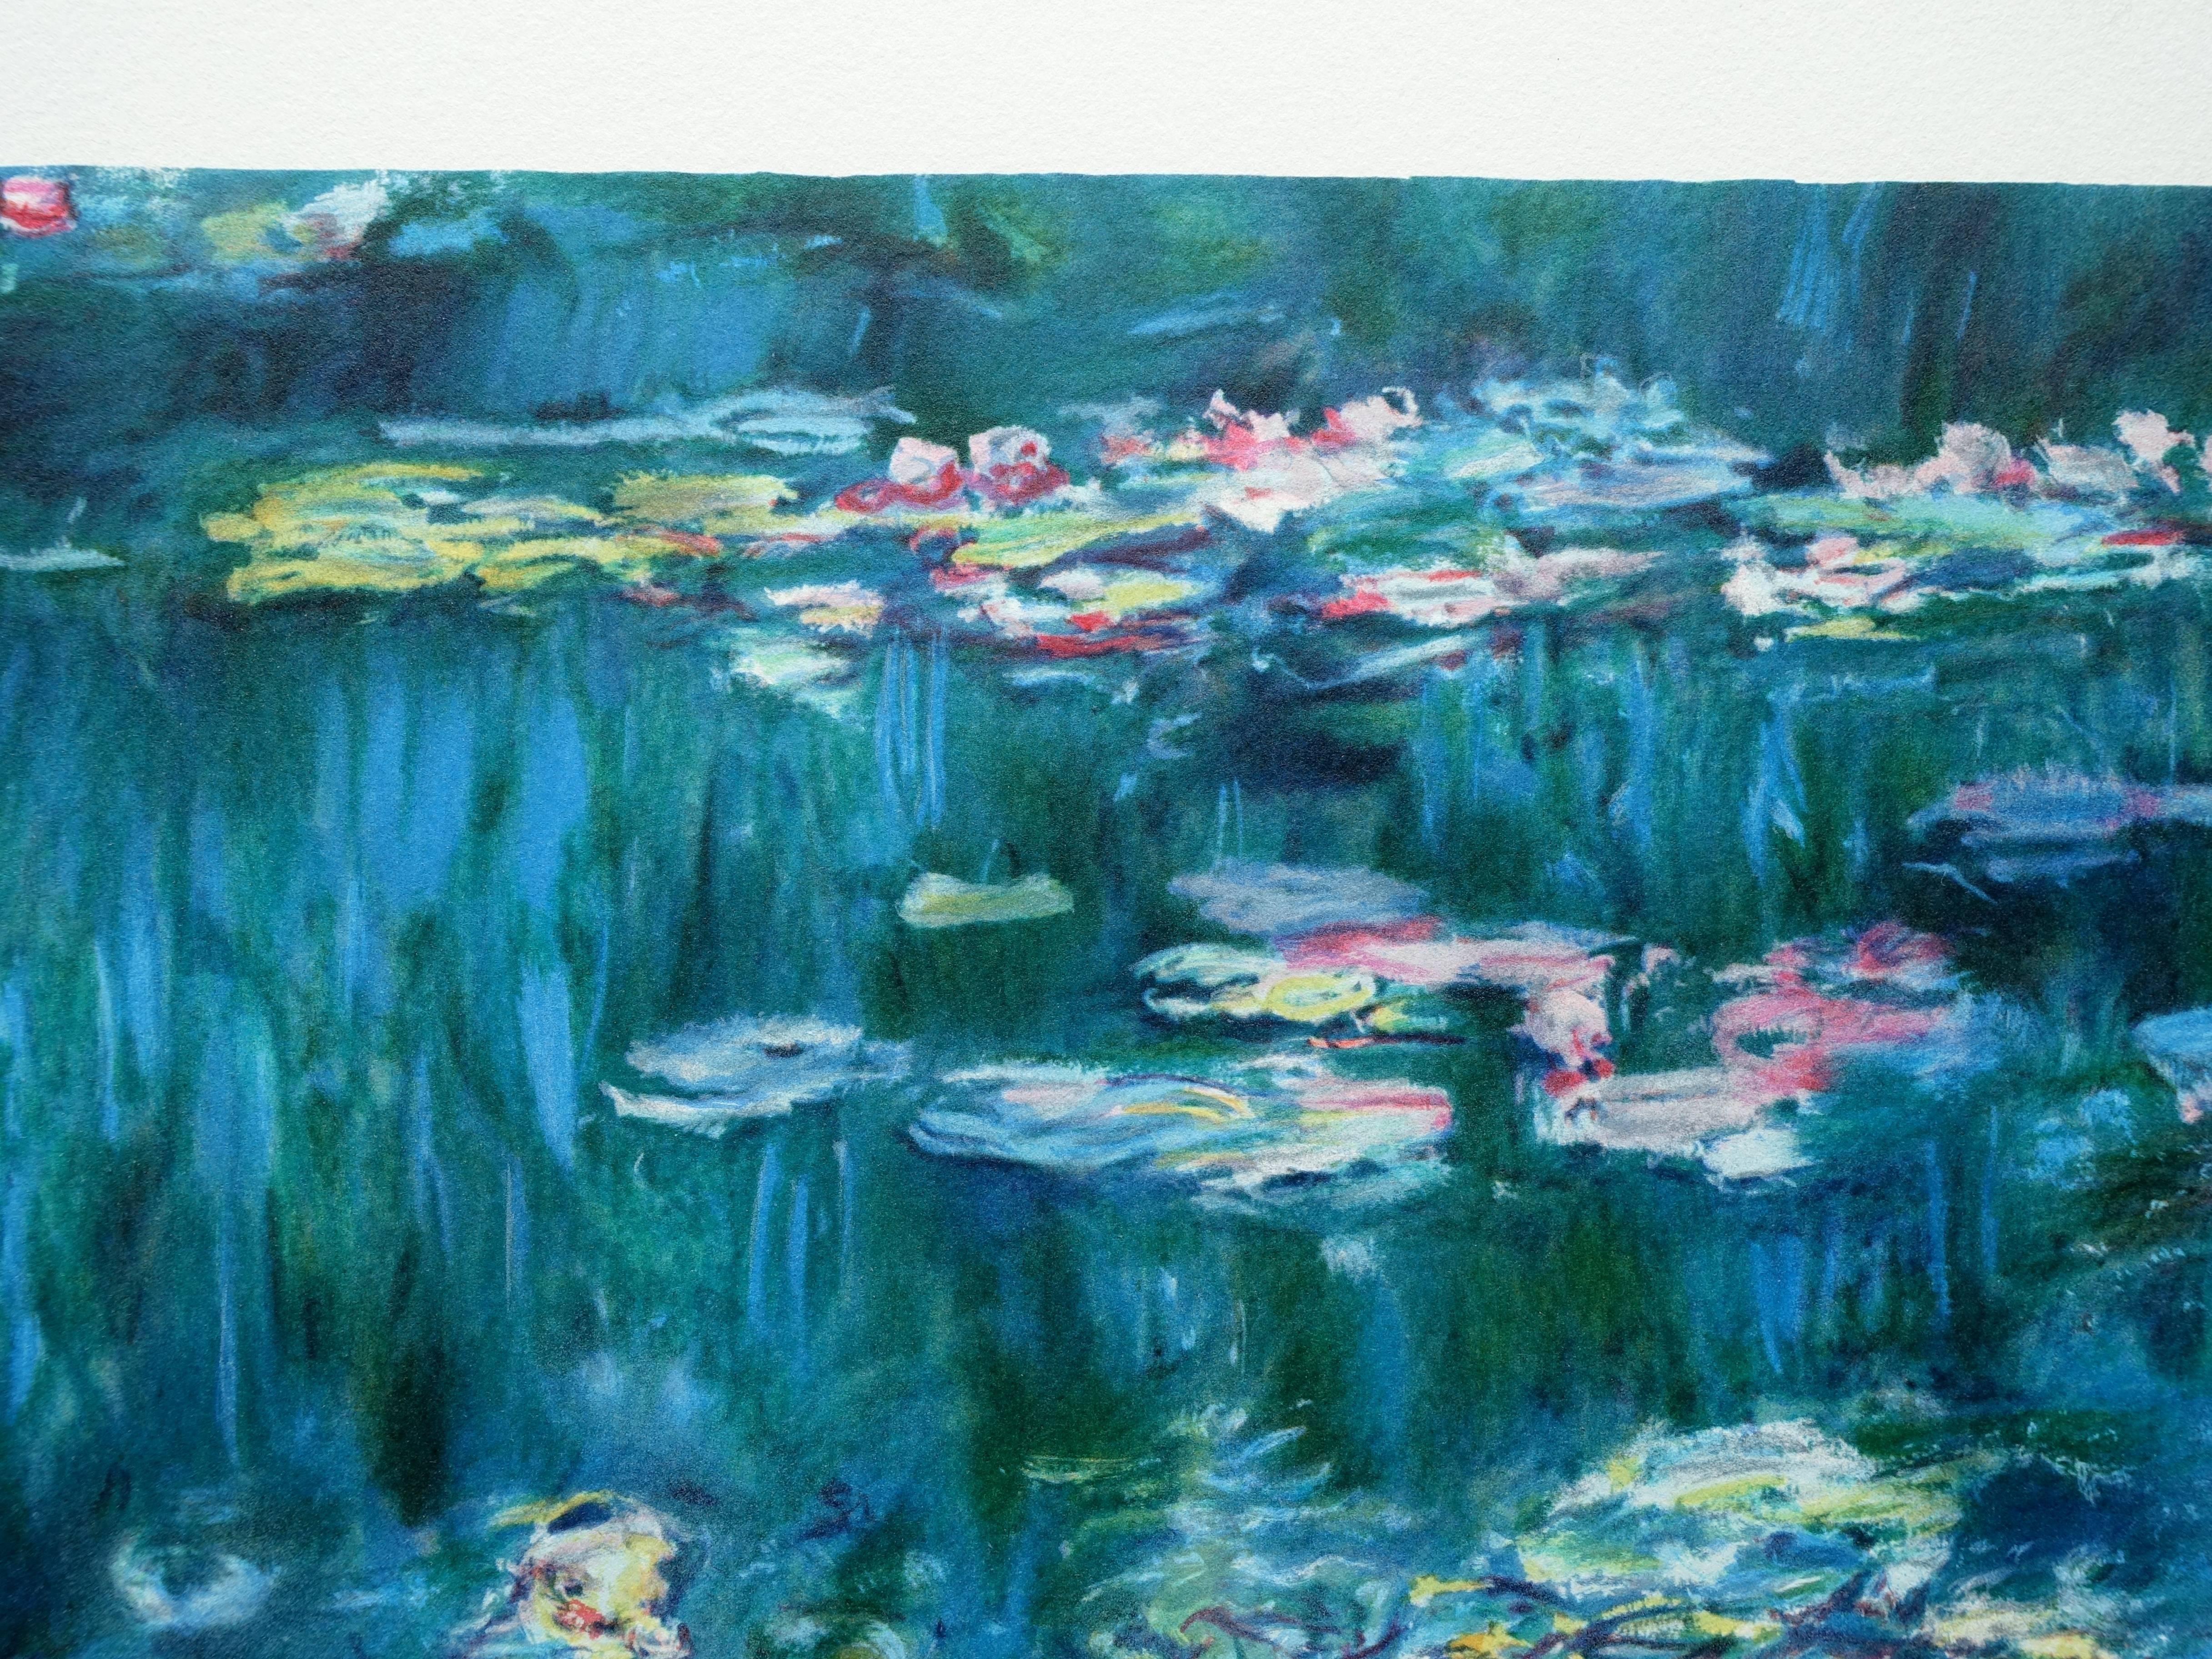 The Nymphs in Giverny - Lithograph - 300 copies - Impressionist Print by (after) Claude Monet